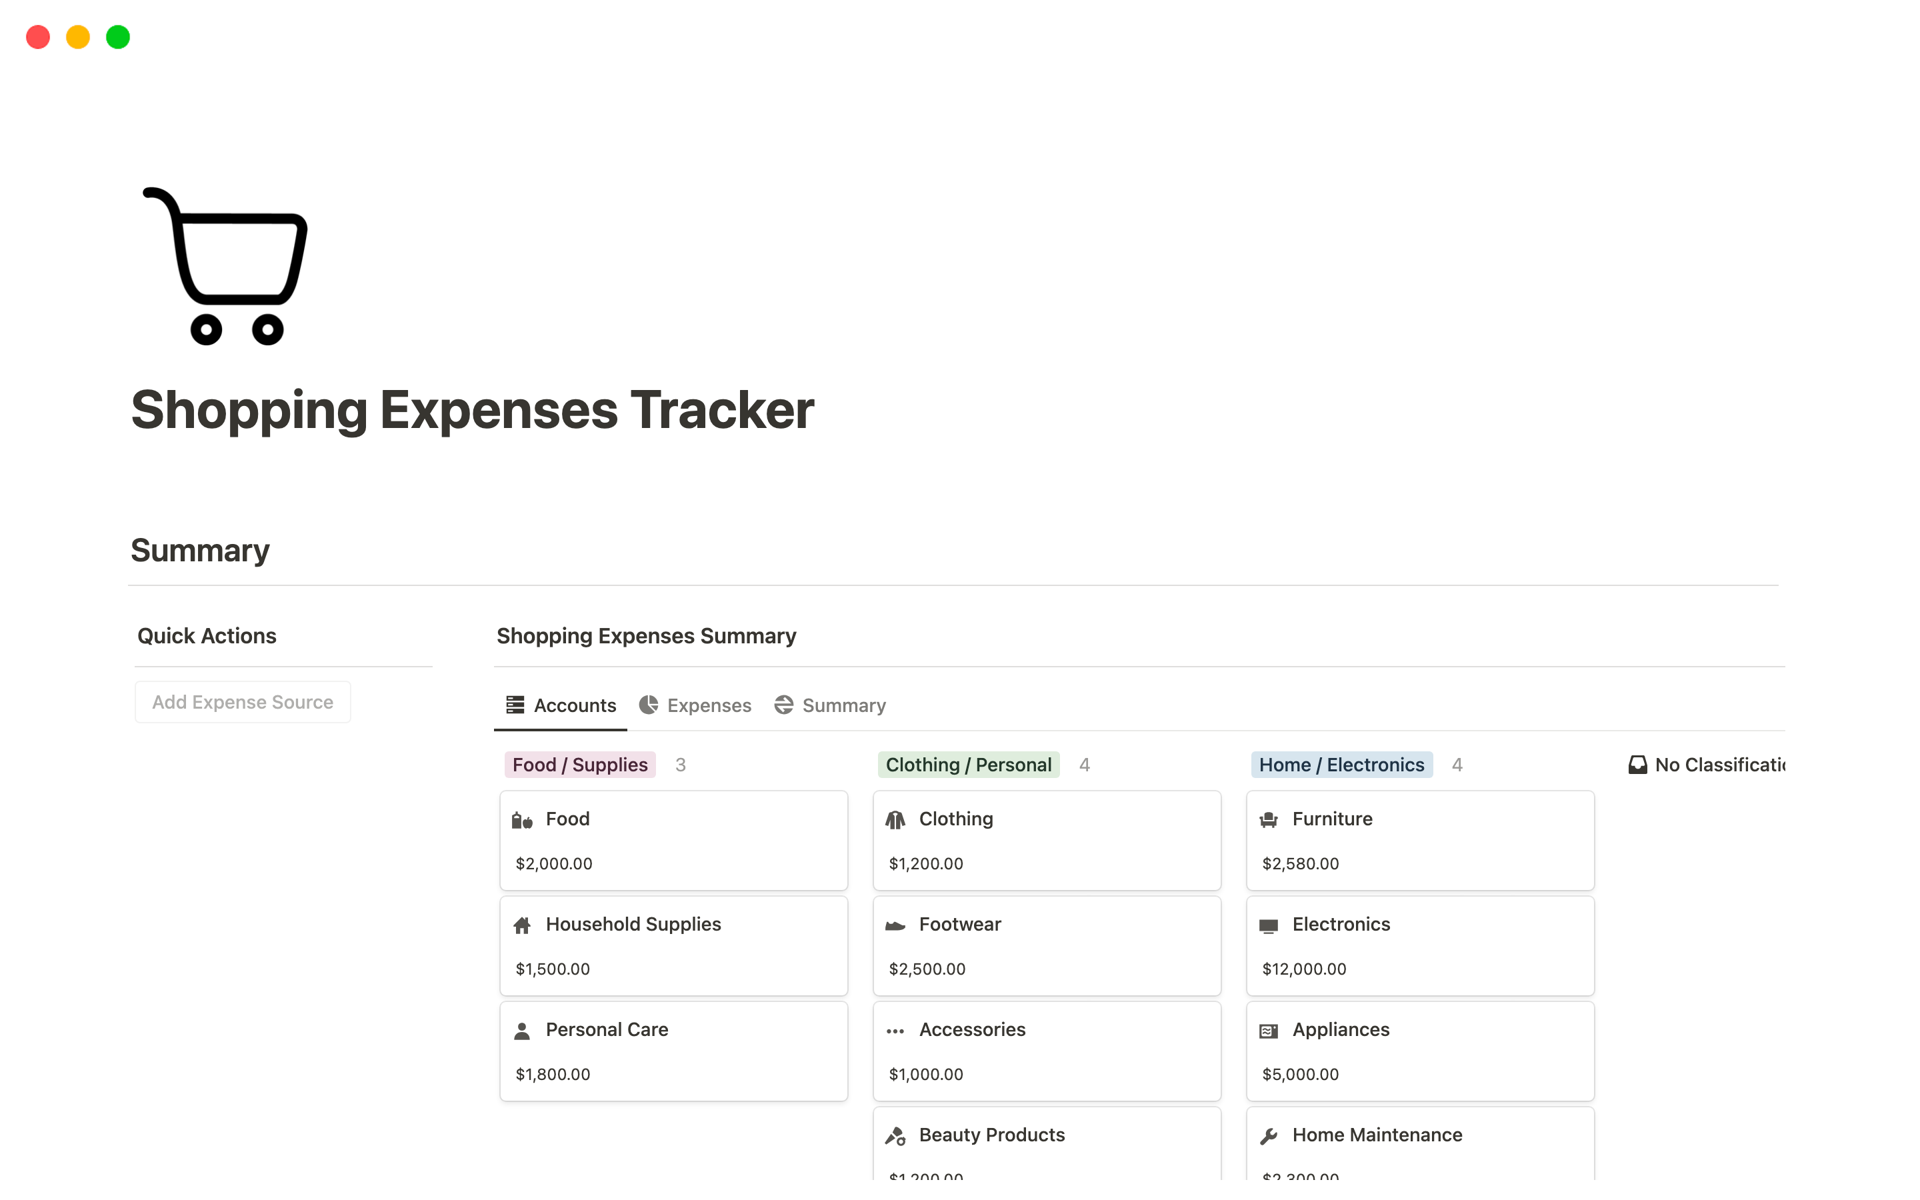 A shopping expenses tracker is a tool for individuals to monitor and manage their personal or household spending on various items and goods.